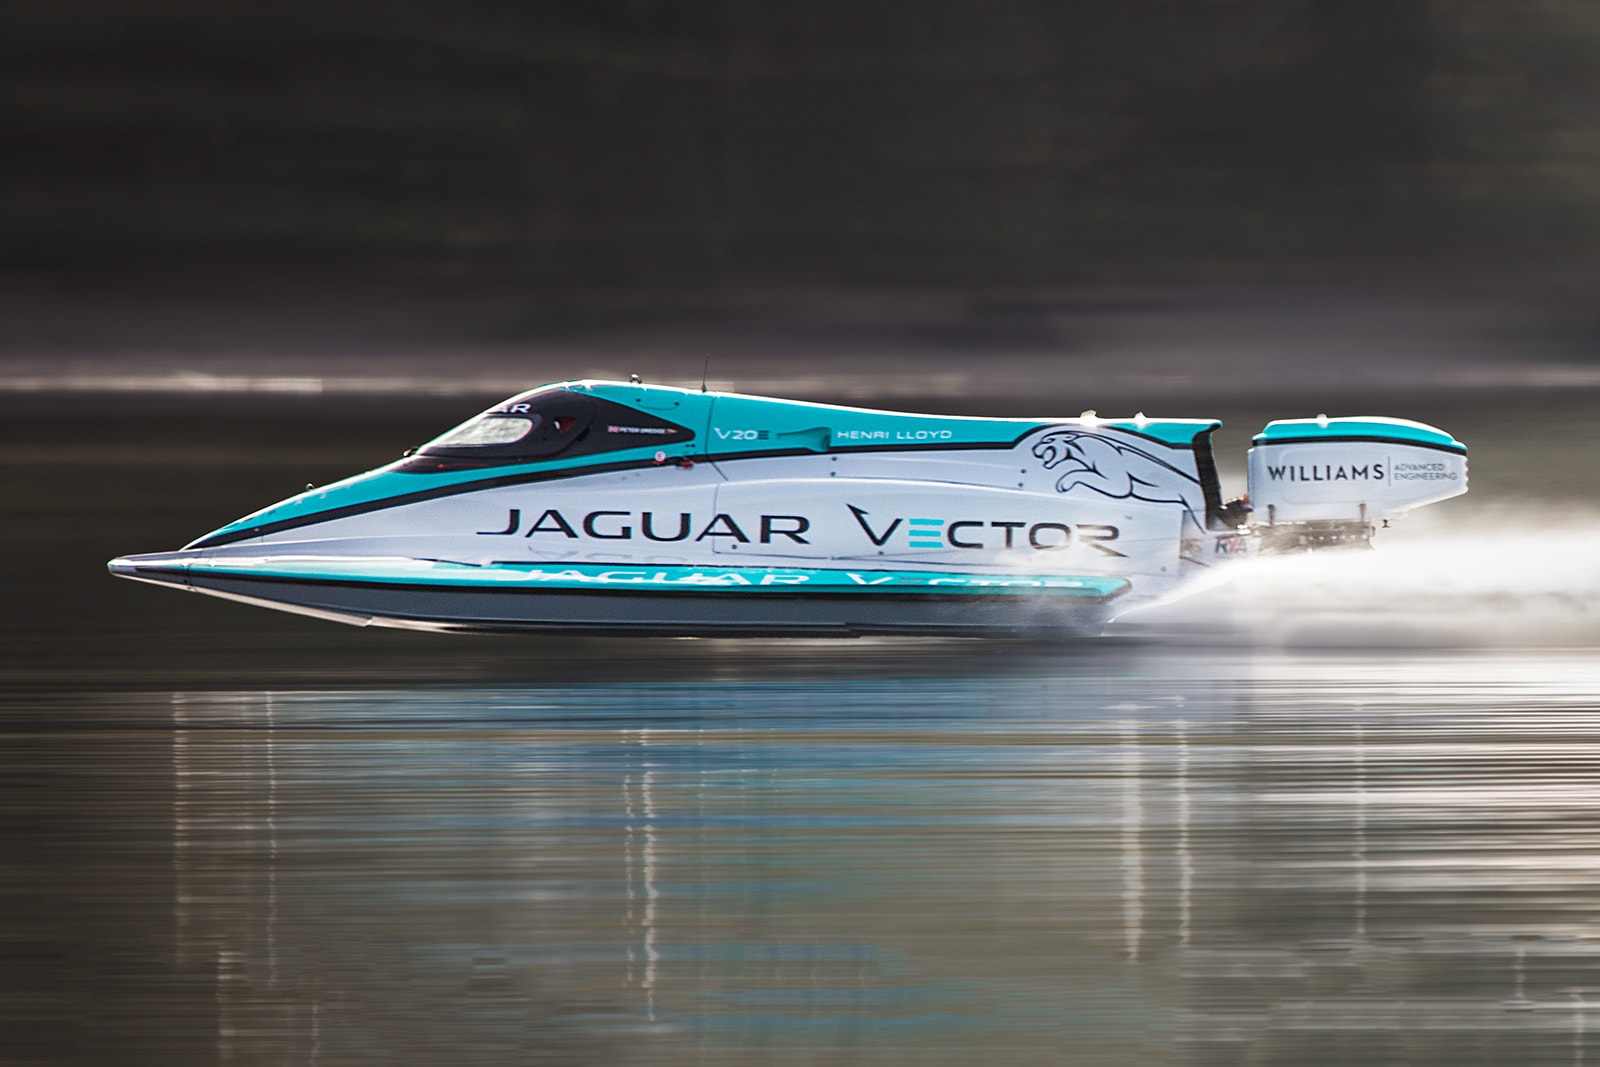 Jaguar Vector Racing V20E Boat World Electric Speed Record Williams Advanced Engineering